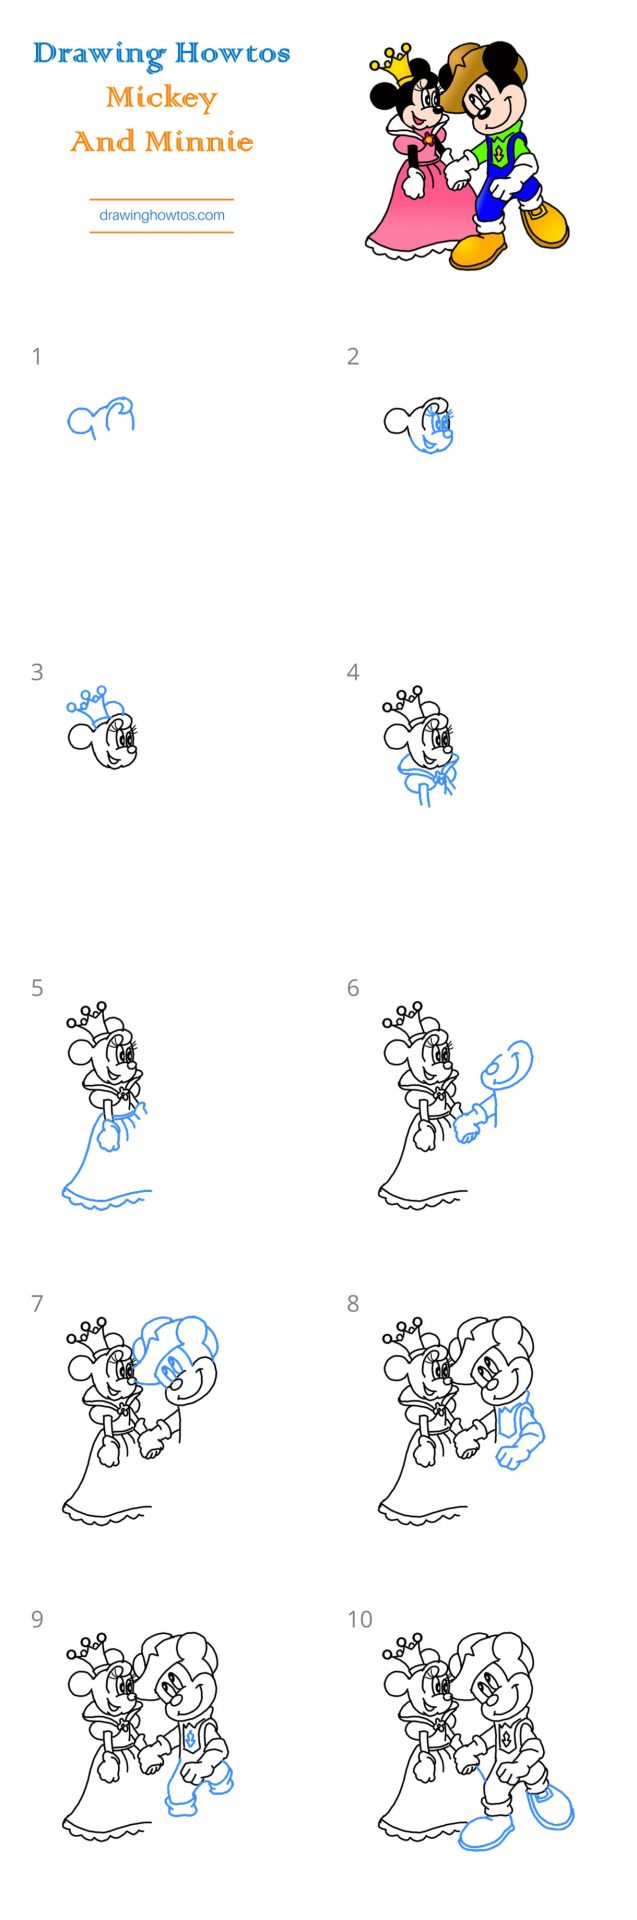 How to Draw Mickey And Minnie Step by Step